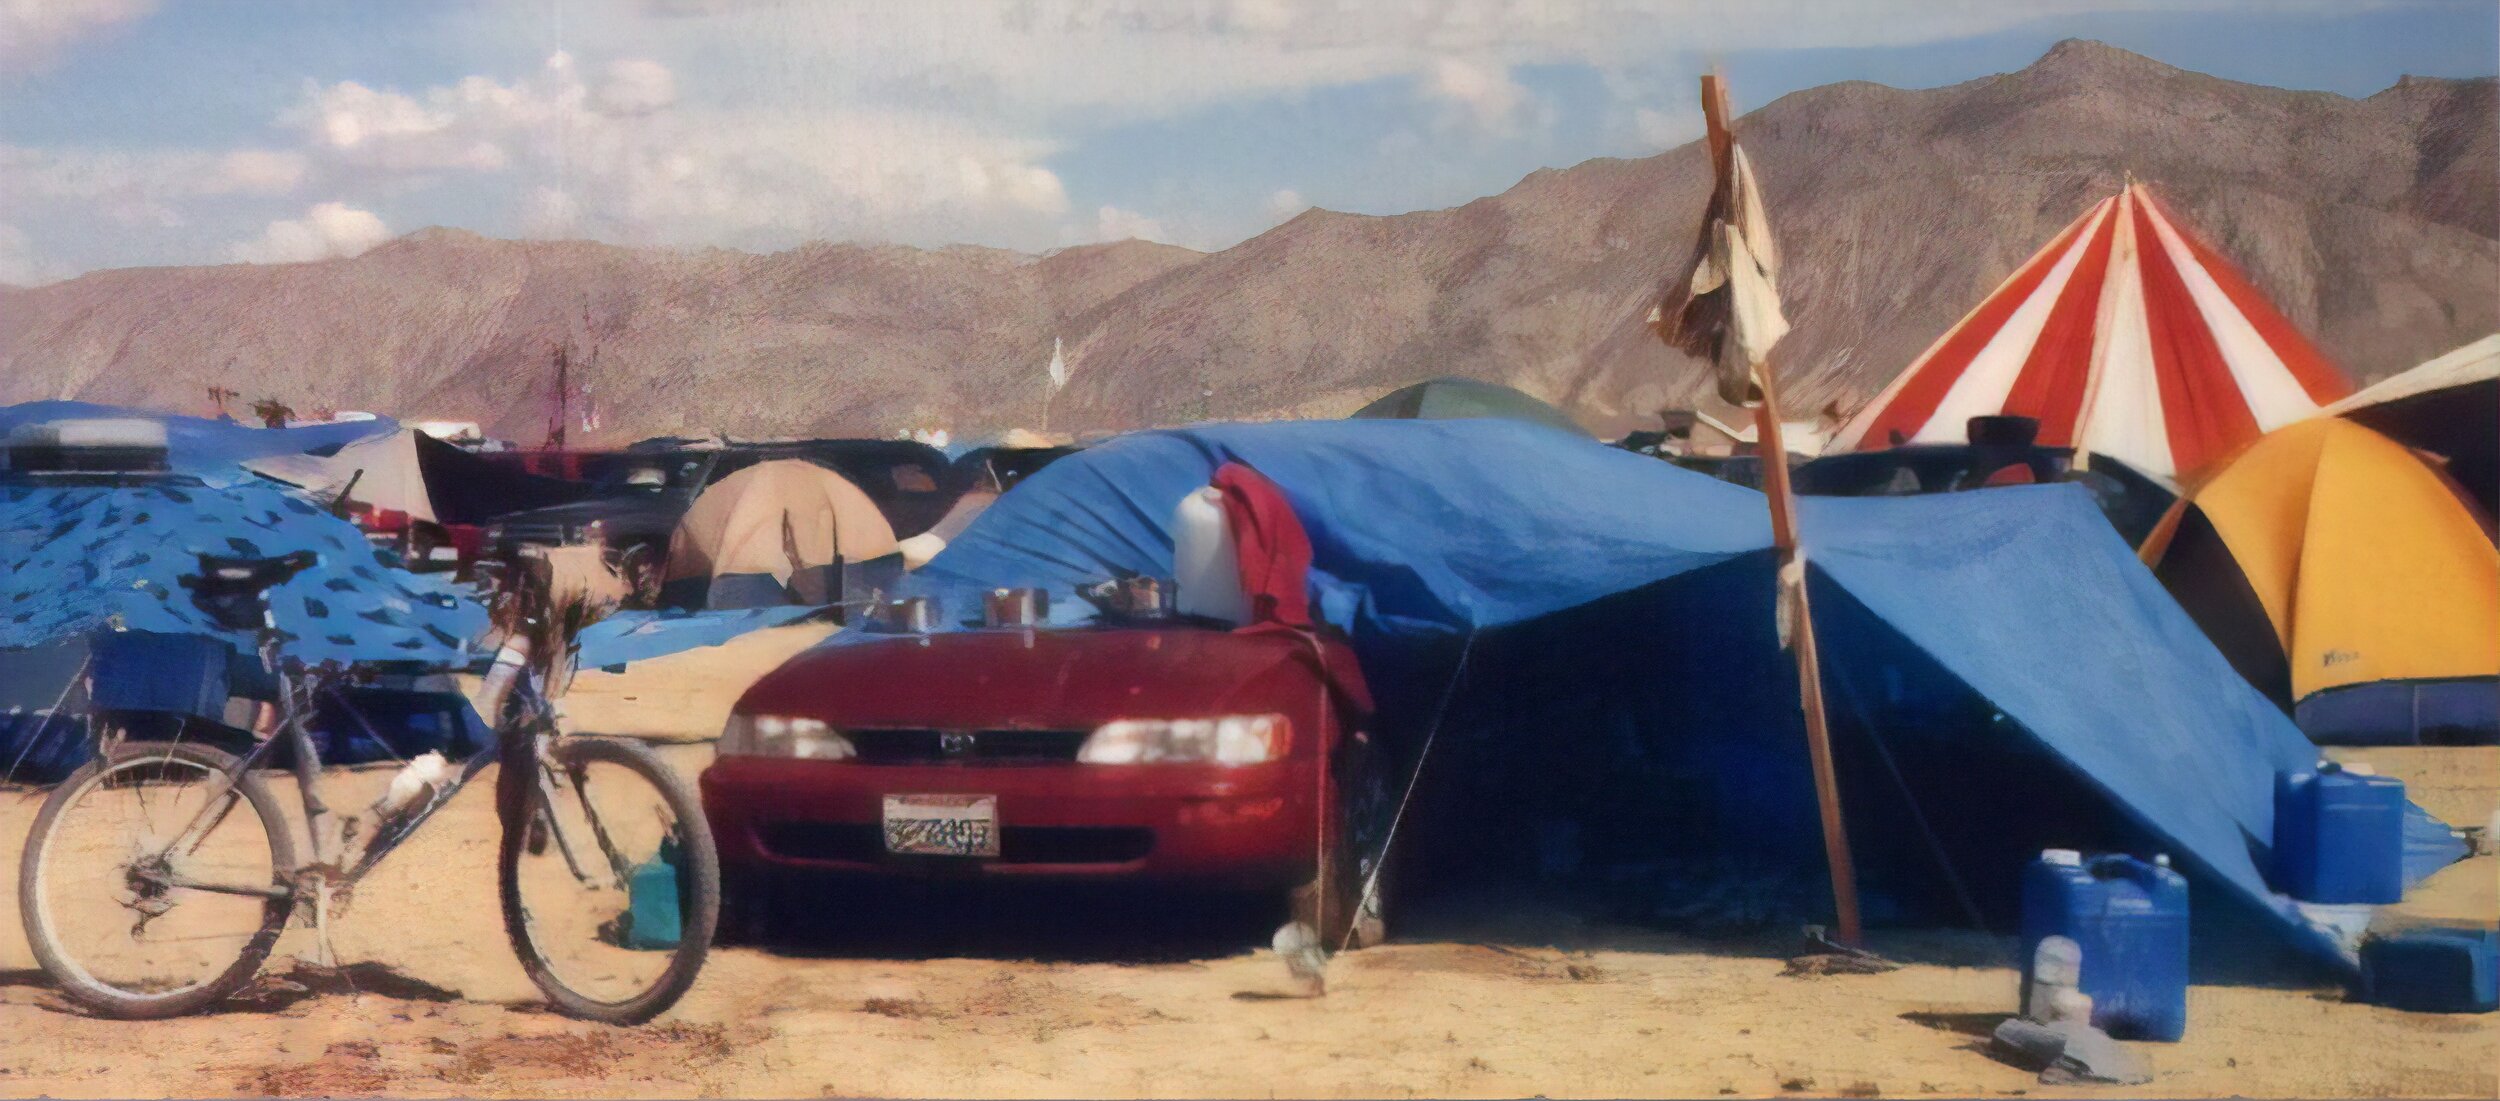  Here is my camp. The two right tires of the car are parked right on the plastic; it's not blowing anywhere. After crawling into my nice new shade shelter I soon noticed something very strange; it felt hotter inside than outside! The thermometer soon